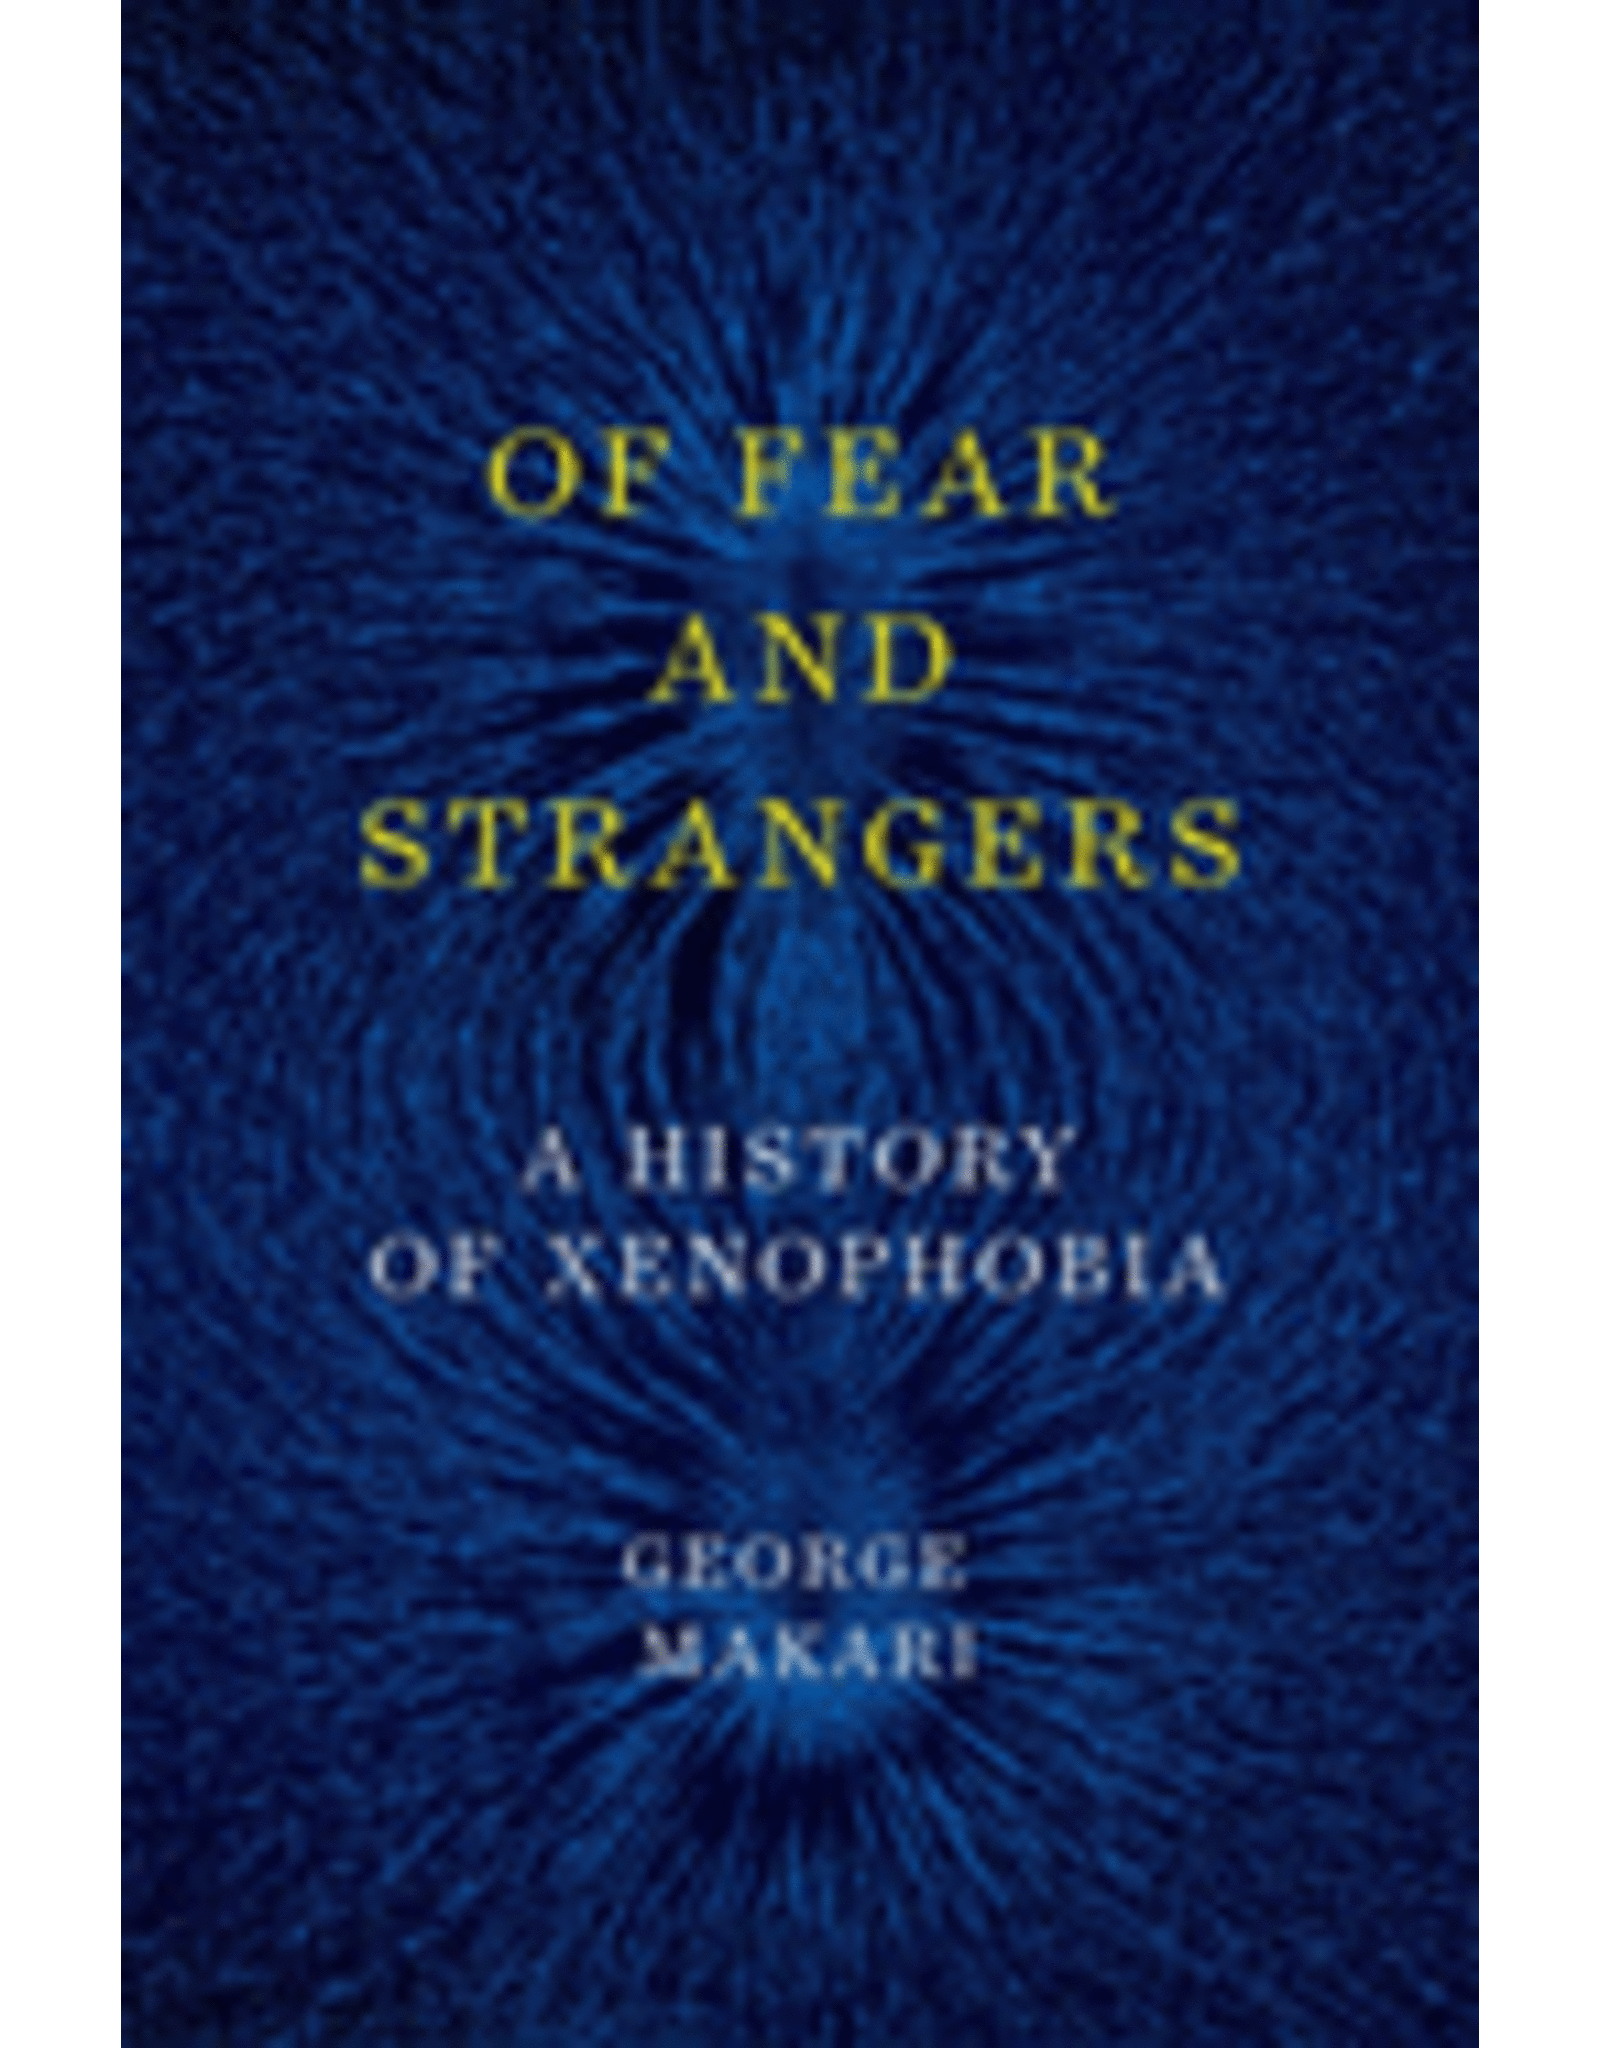 Books Of Fear and Strangers: A History of Xenophobia by George Makari